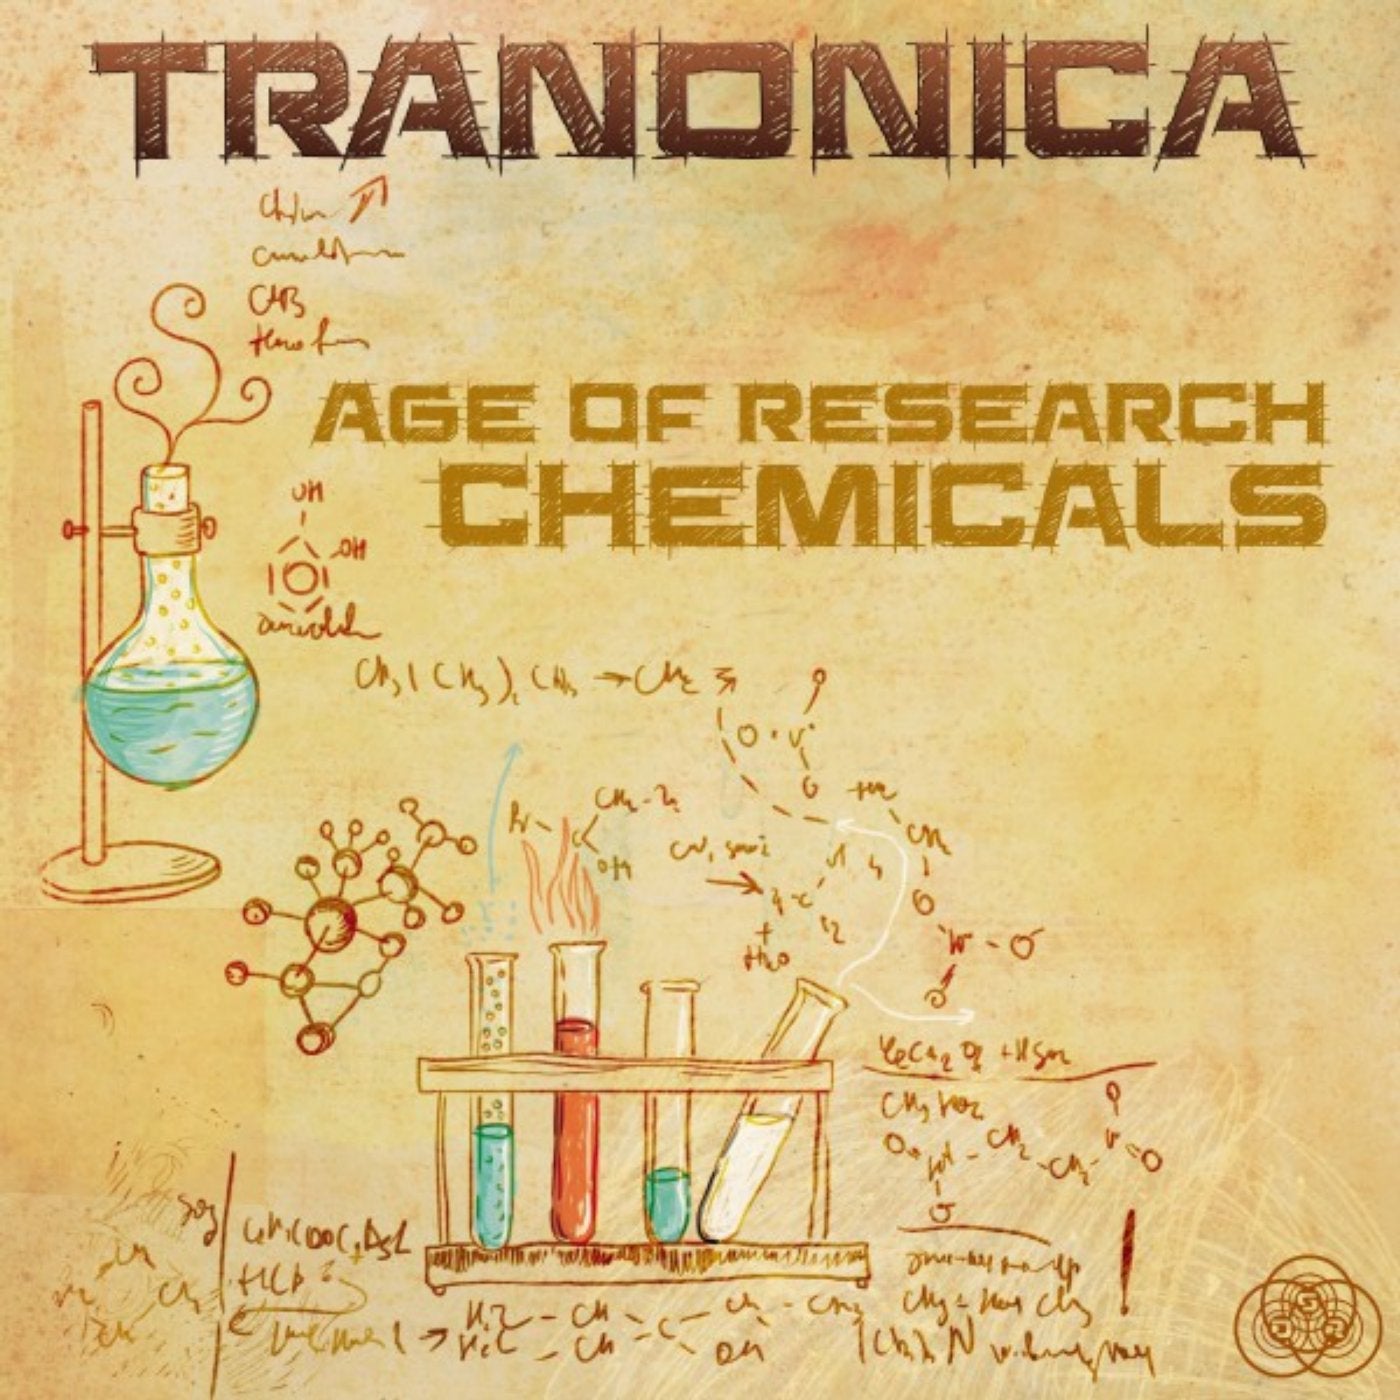 Age of Research Chemicals